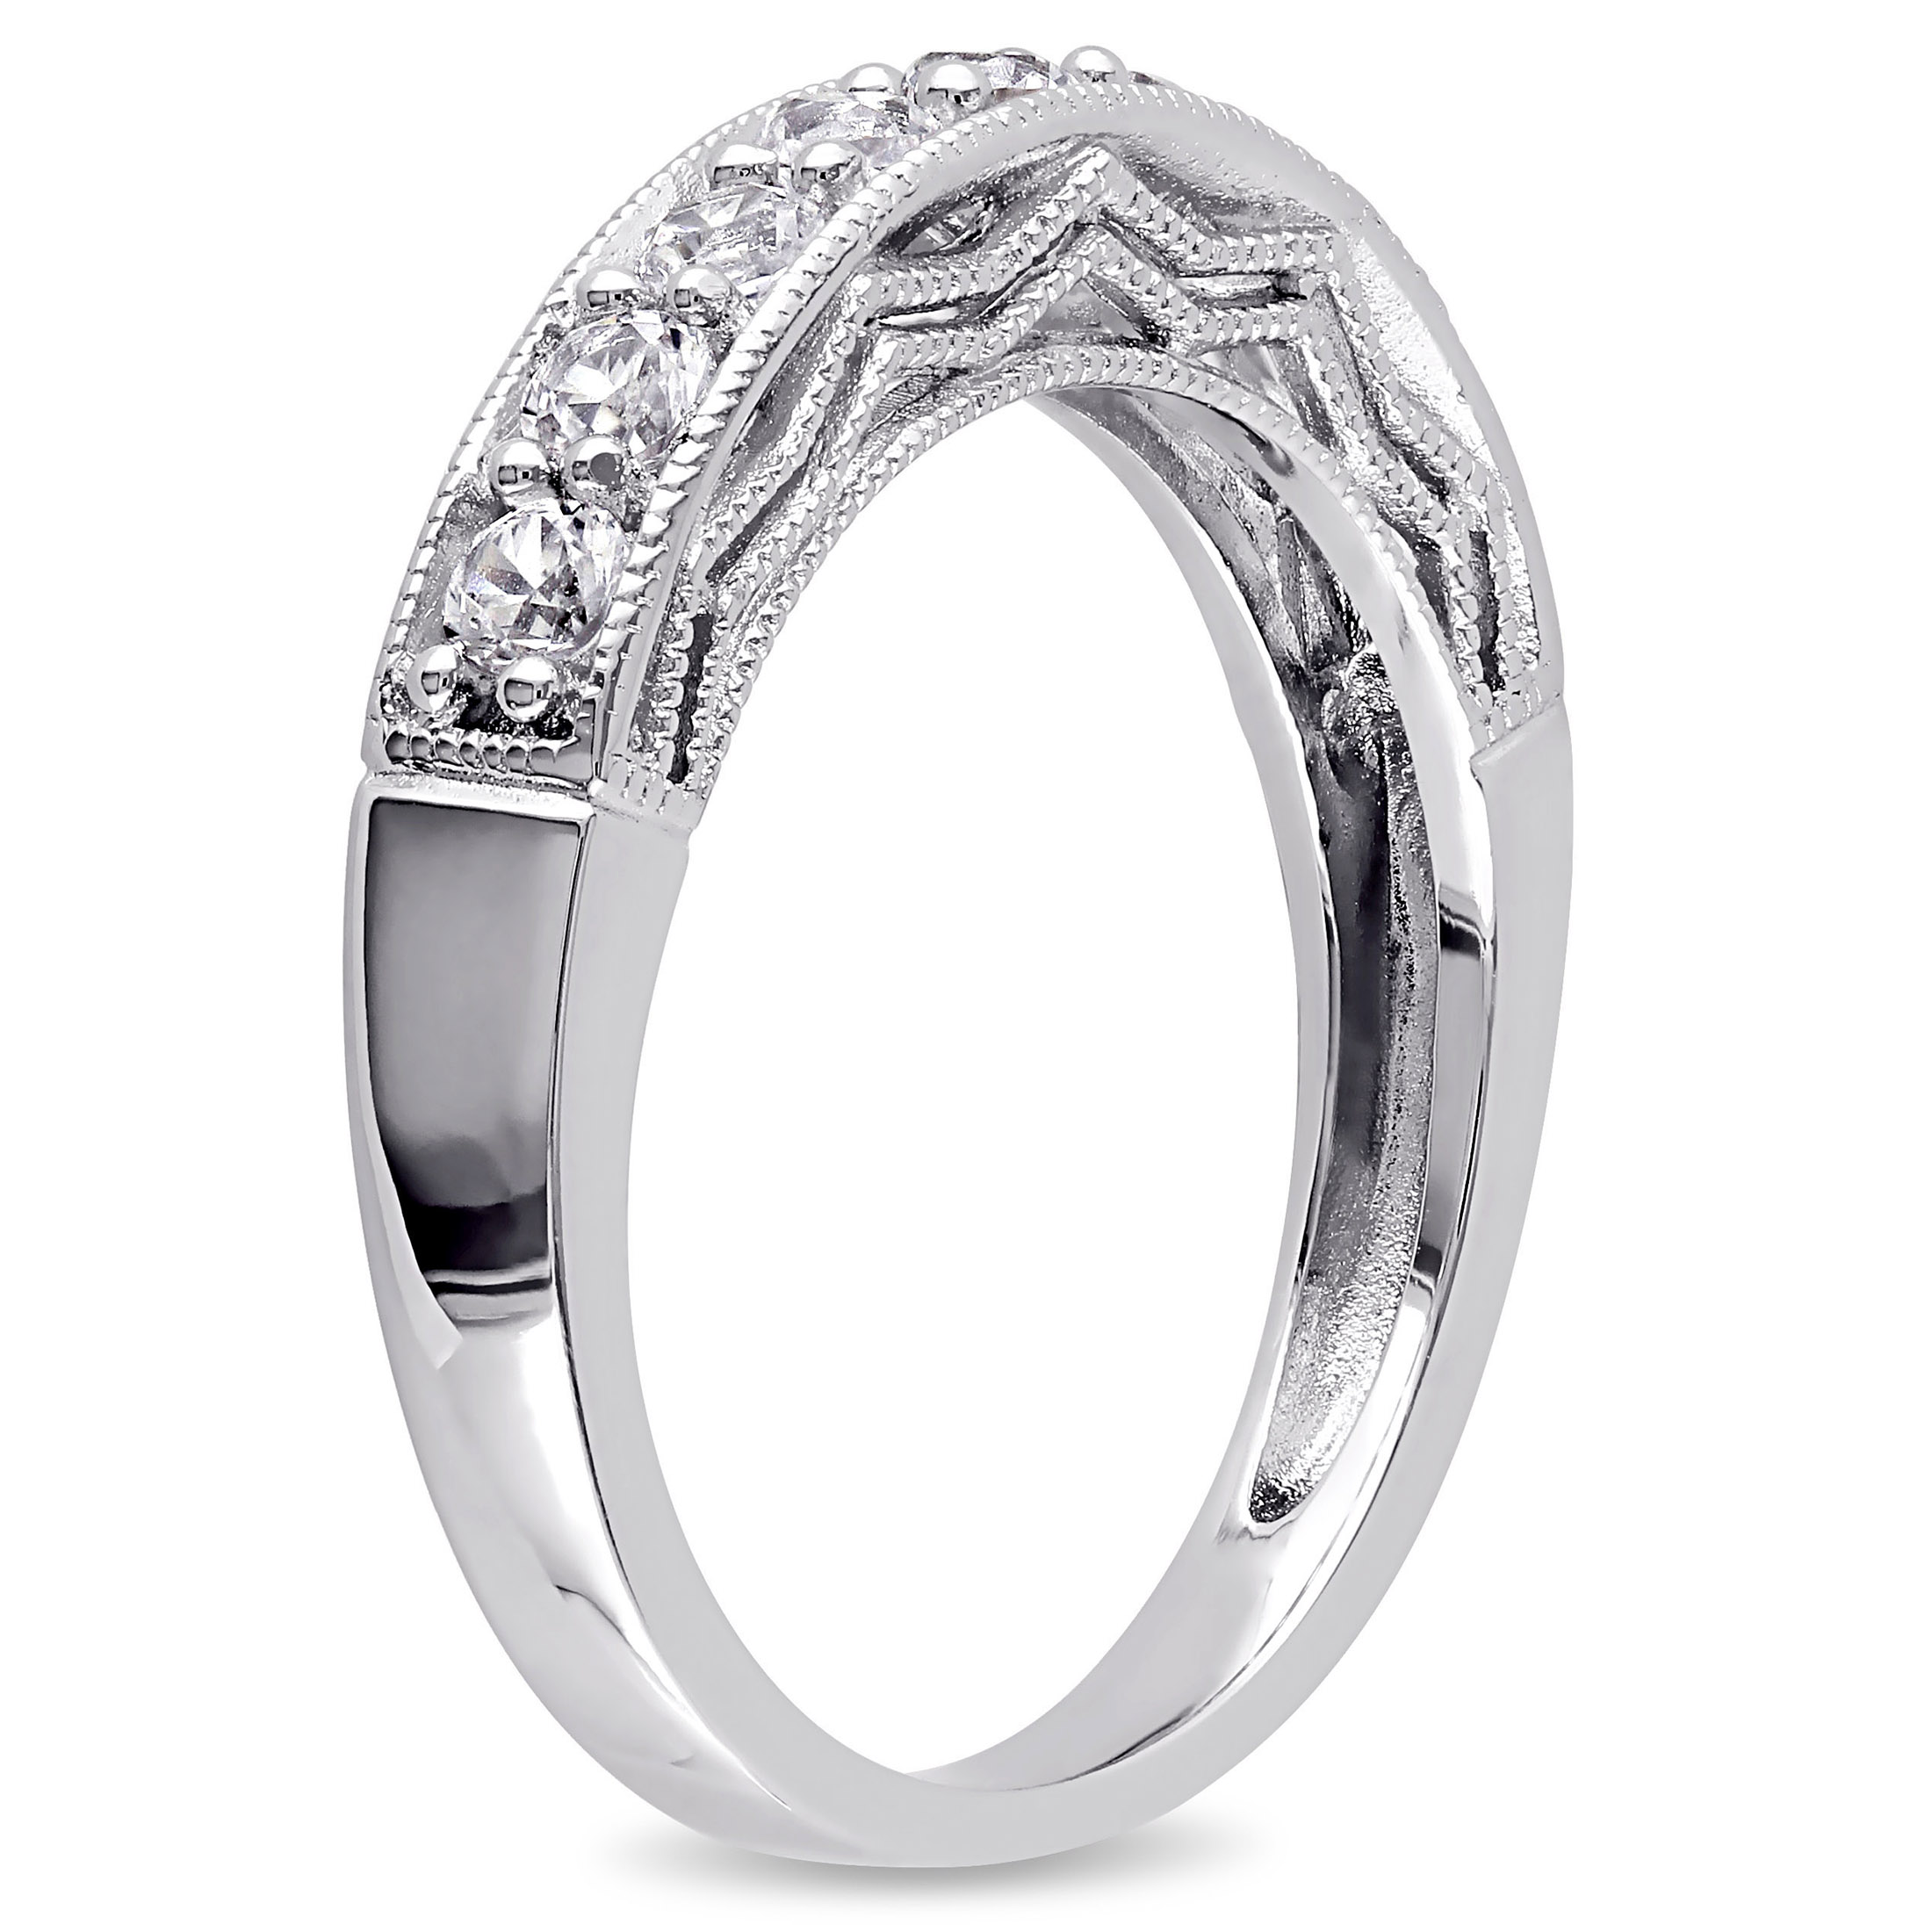 Everly Women's Anniversary Bridal 4/5 CT T.G.W. Round-Cut Created White Sapphire Sterling Silver Semi-Eternity Anniversary Ring with Pave Setting and Milgrain Detail - image 4 of 8